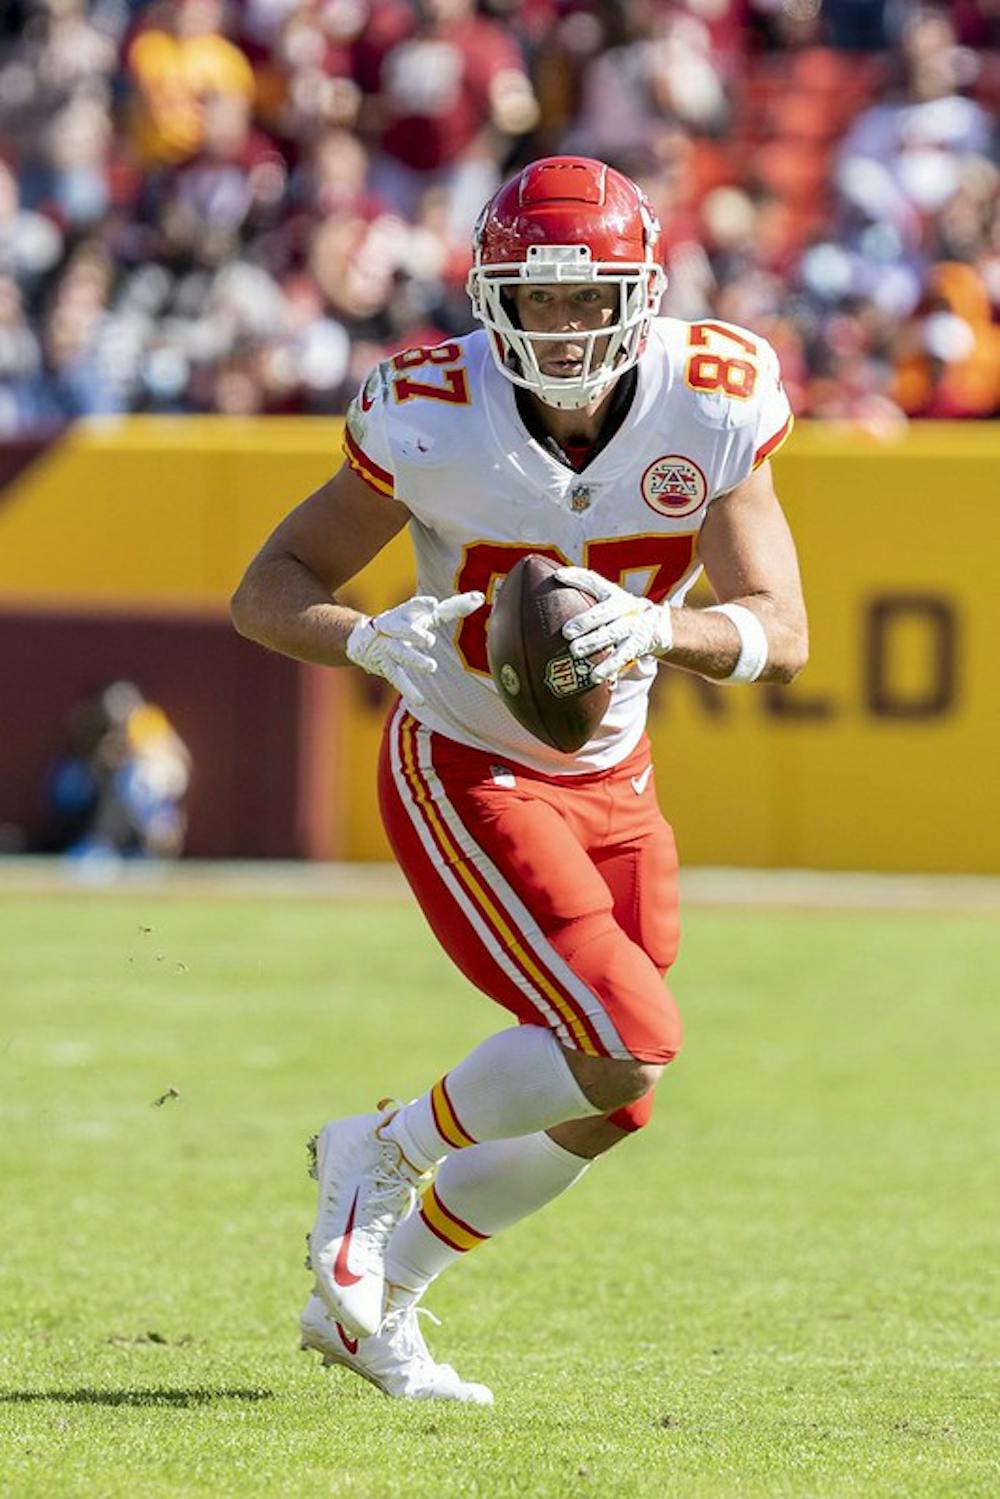 <p><em>The Chiefs and the 49ers will battle it out in the Super Bowl on Sunday (Photo courtesy of All-Pro Reels / </em><a href="https://www.flickr.com/photos/10457902@N08/51615471971" target="_blank"><em>Flickr</em></a><em>).</em></p>